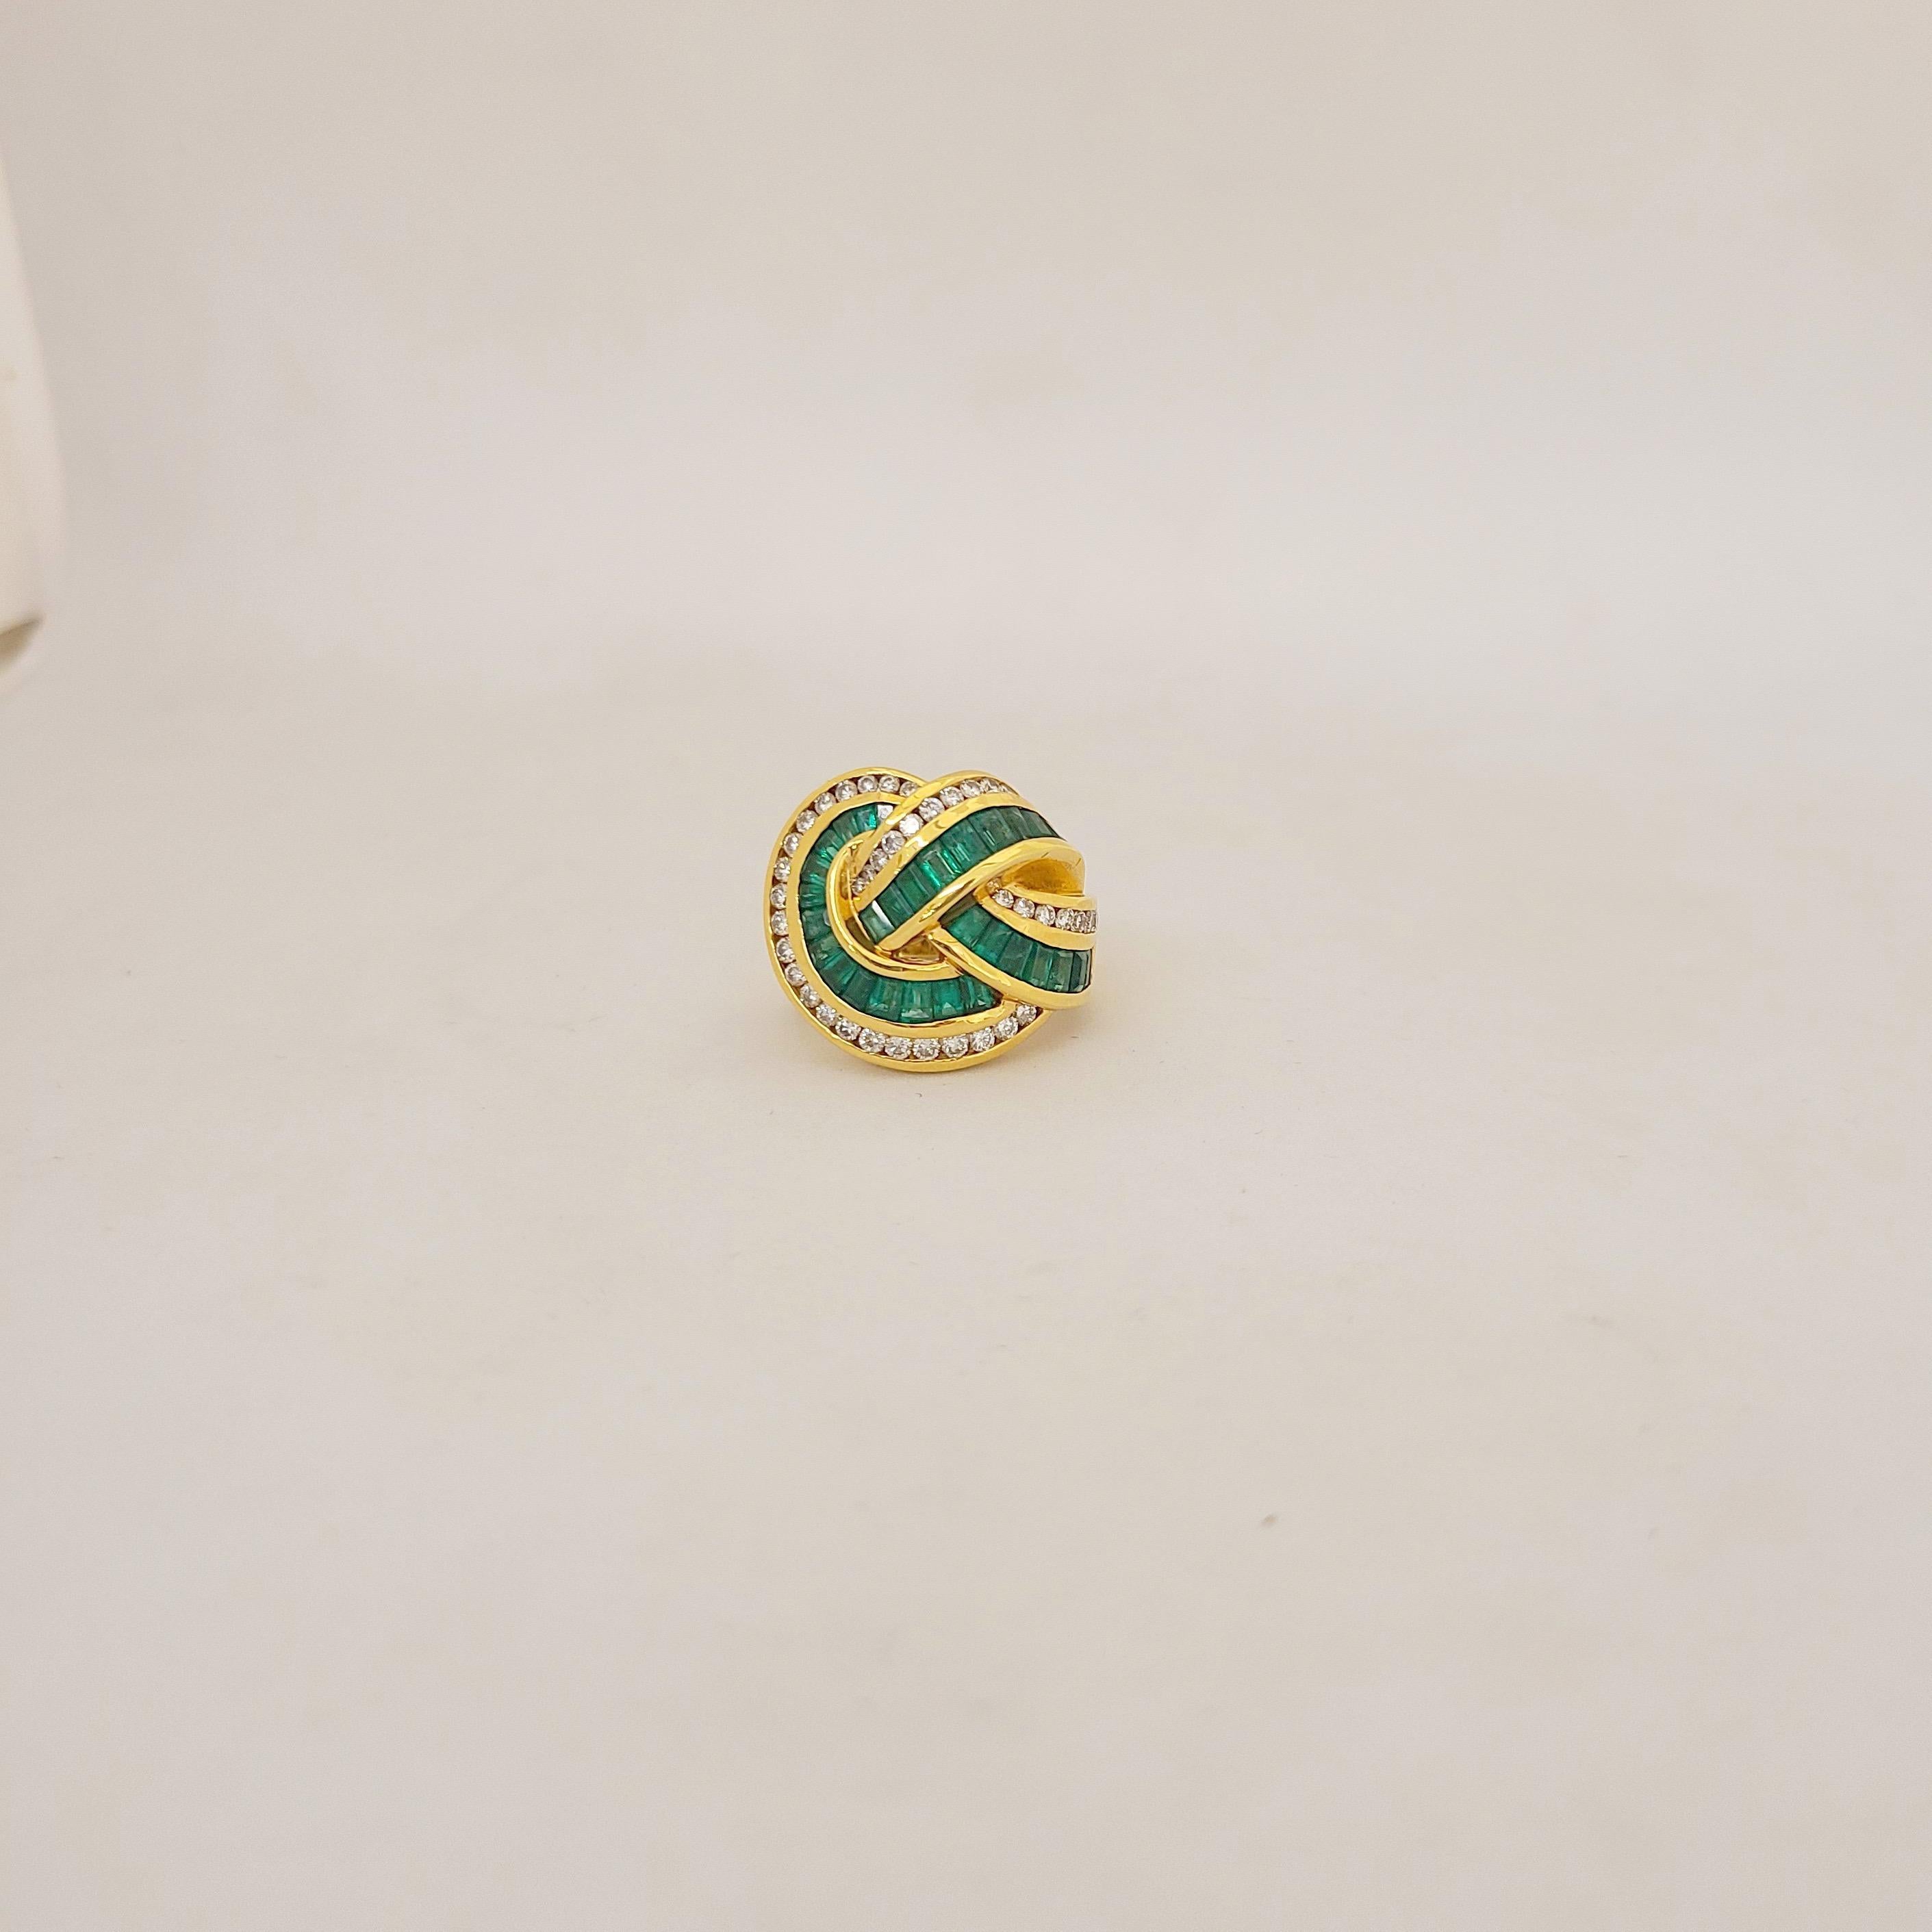 Made with superior quality by Charles Krypell, this ribbon knot design 18k yellow gold ring features 2.59 carats of vivid emeralds and 0.85 carats of high quality round brilliant diamonds - approximately F color, VS clarity. This makes a fabulous